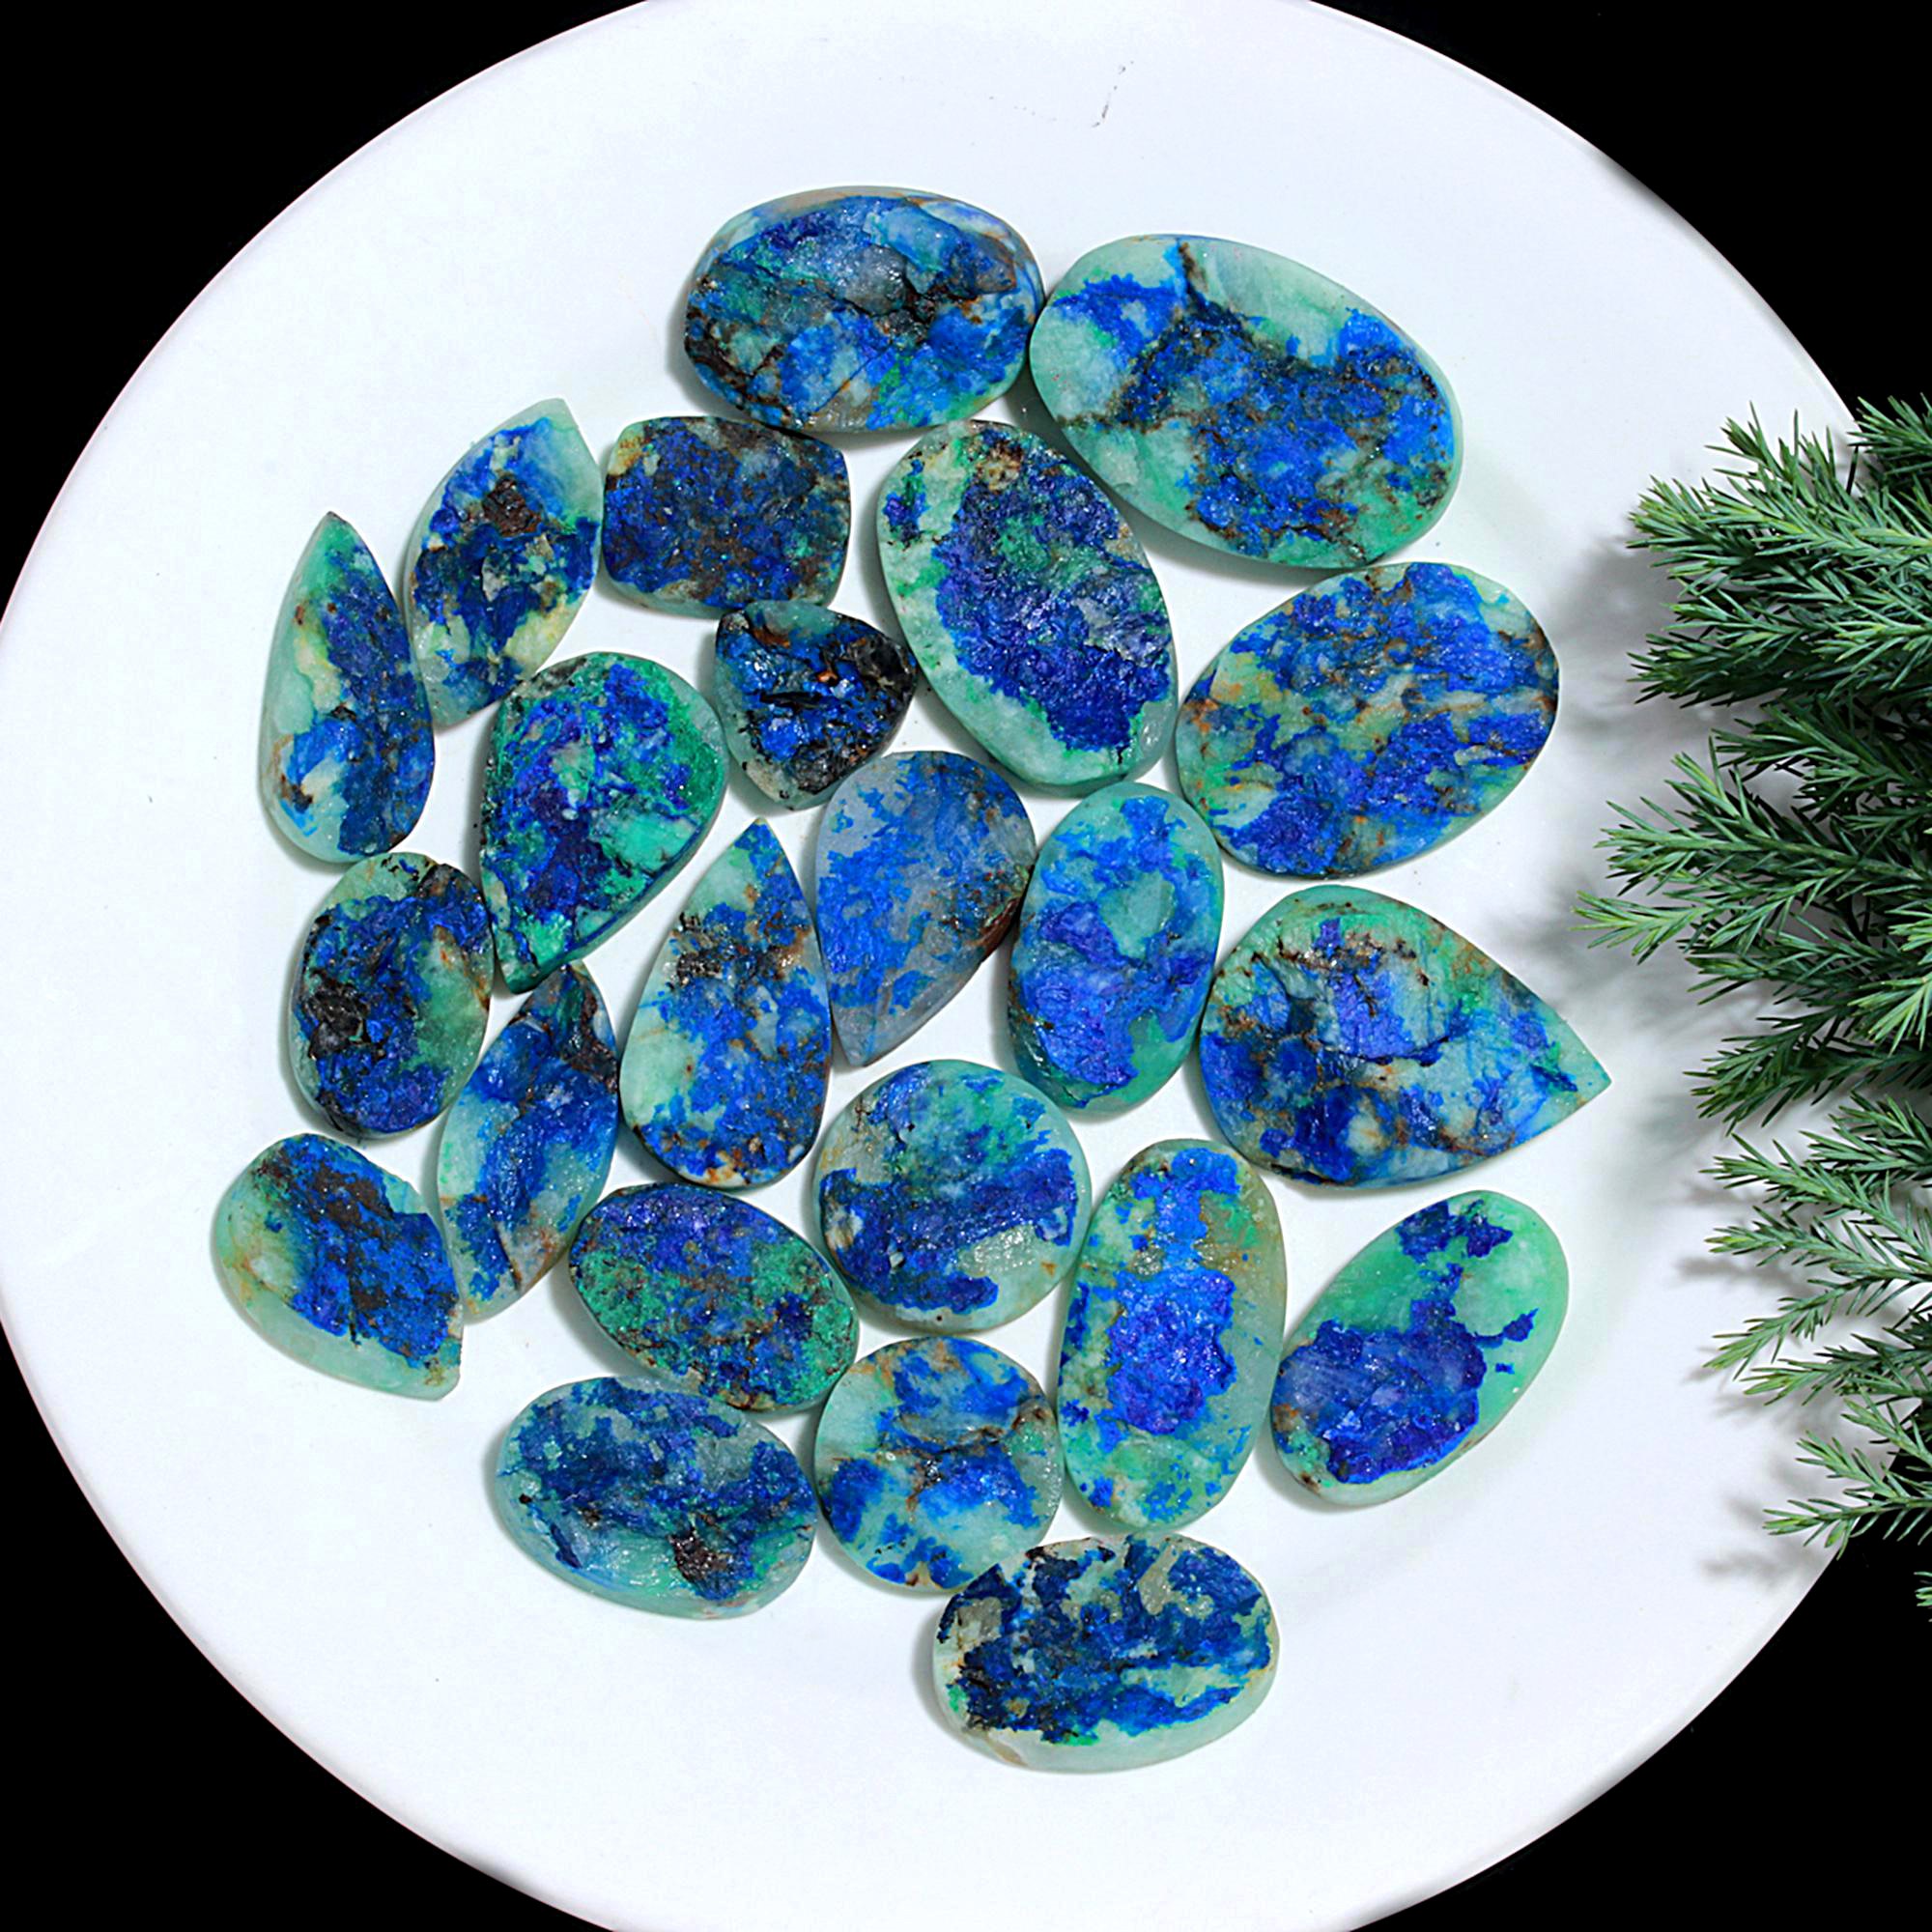 23 Pcs 865.Cts Natural Azurite Druzy Unpolished Loose Cabochon Gemstone For Jewelry Wholesale Lot Size 40x26 22x18mm